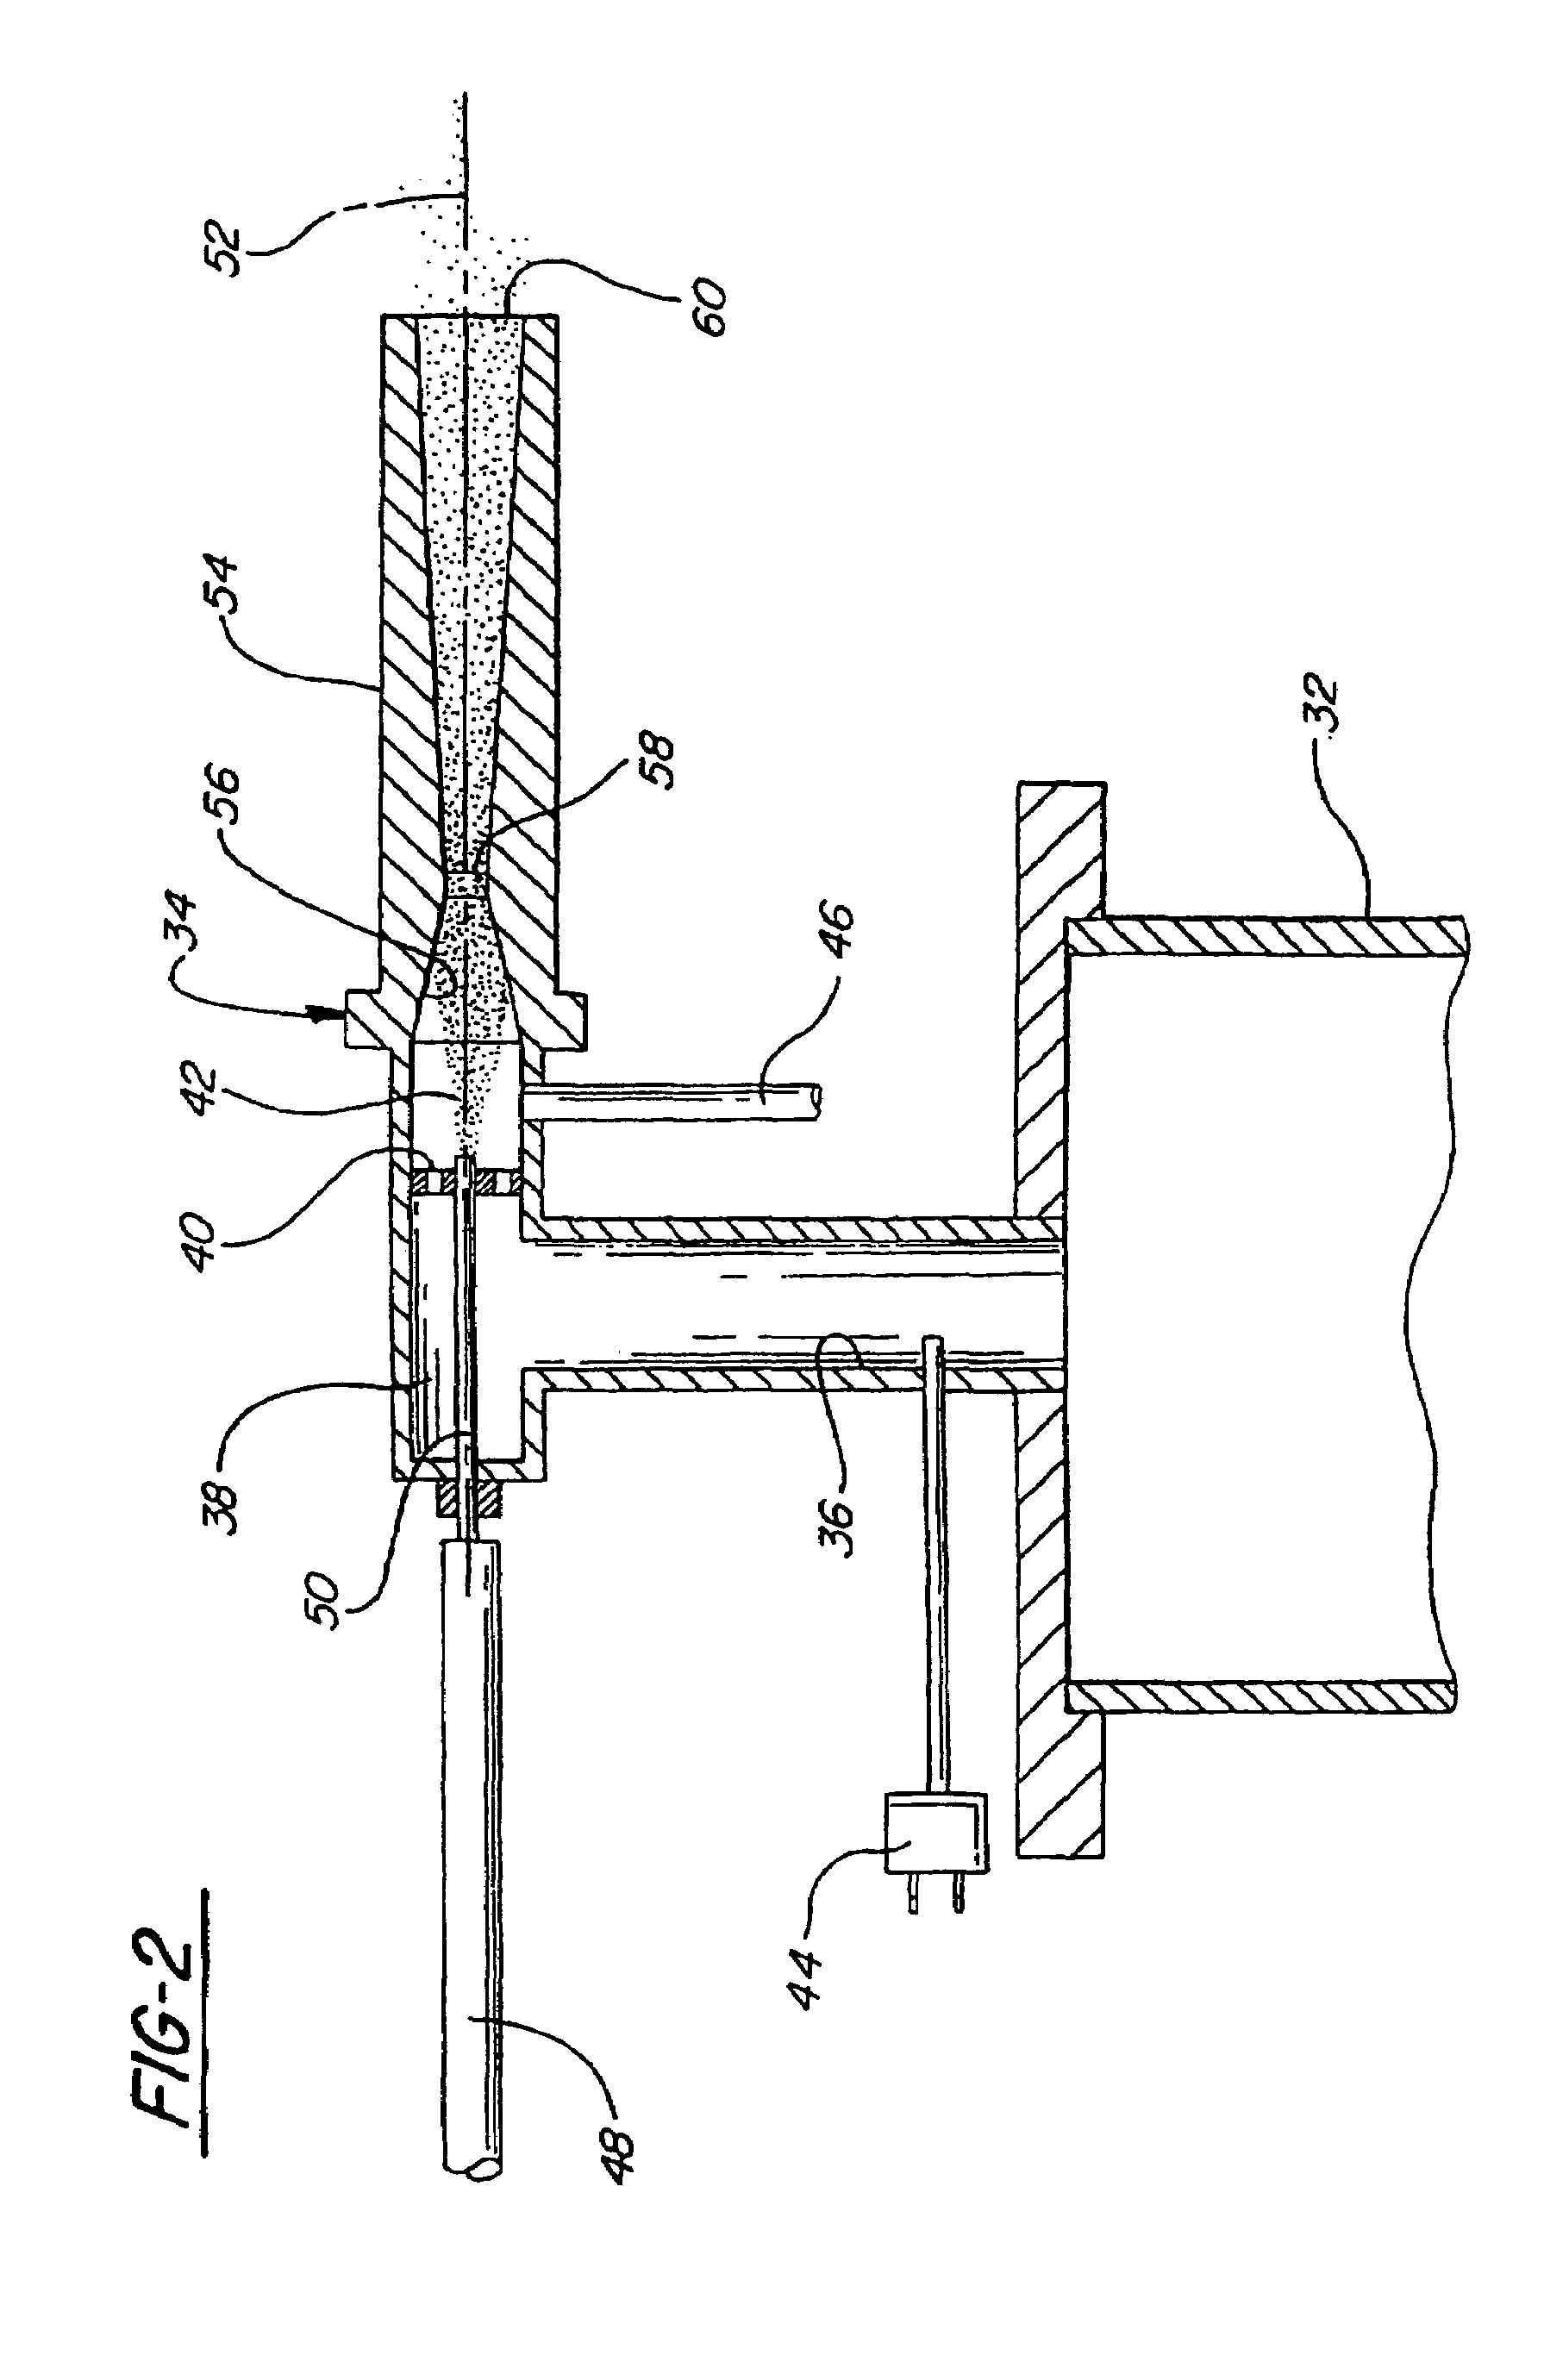 Method for securing ceramic structures and forming electrical connections on the same